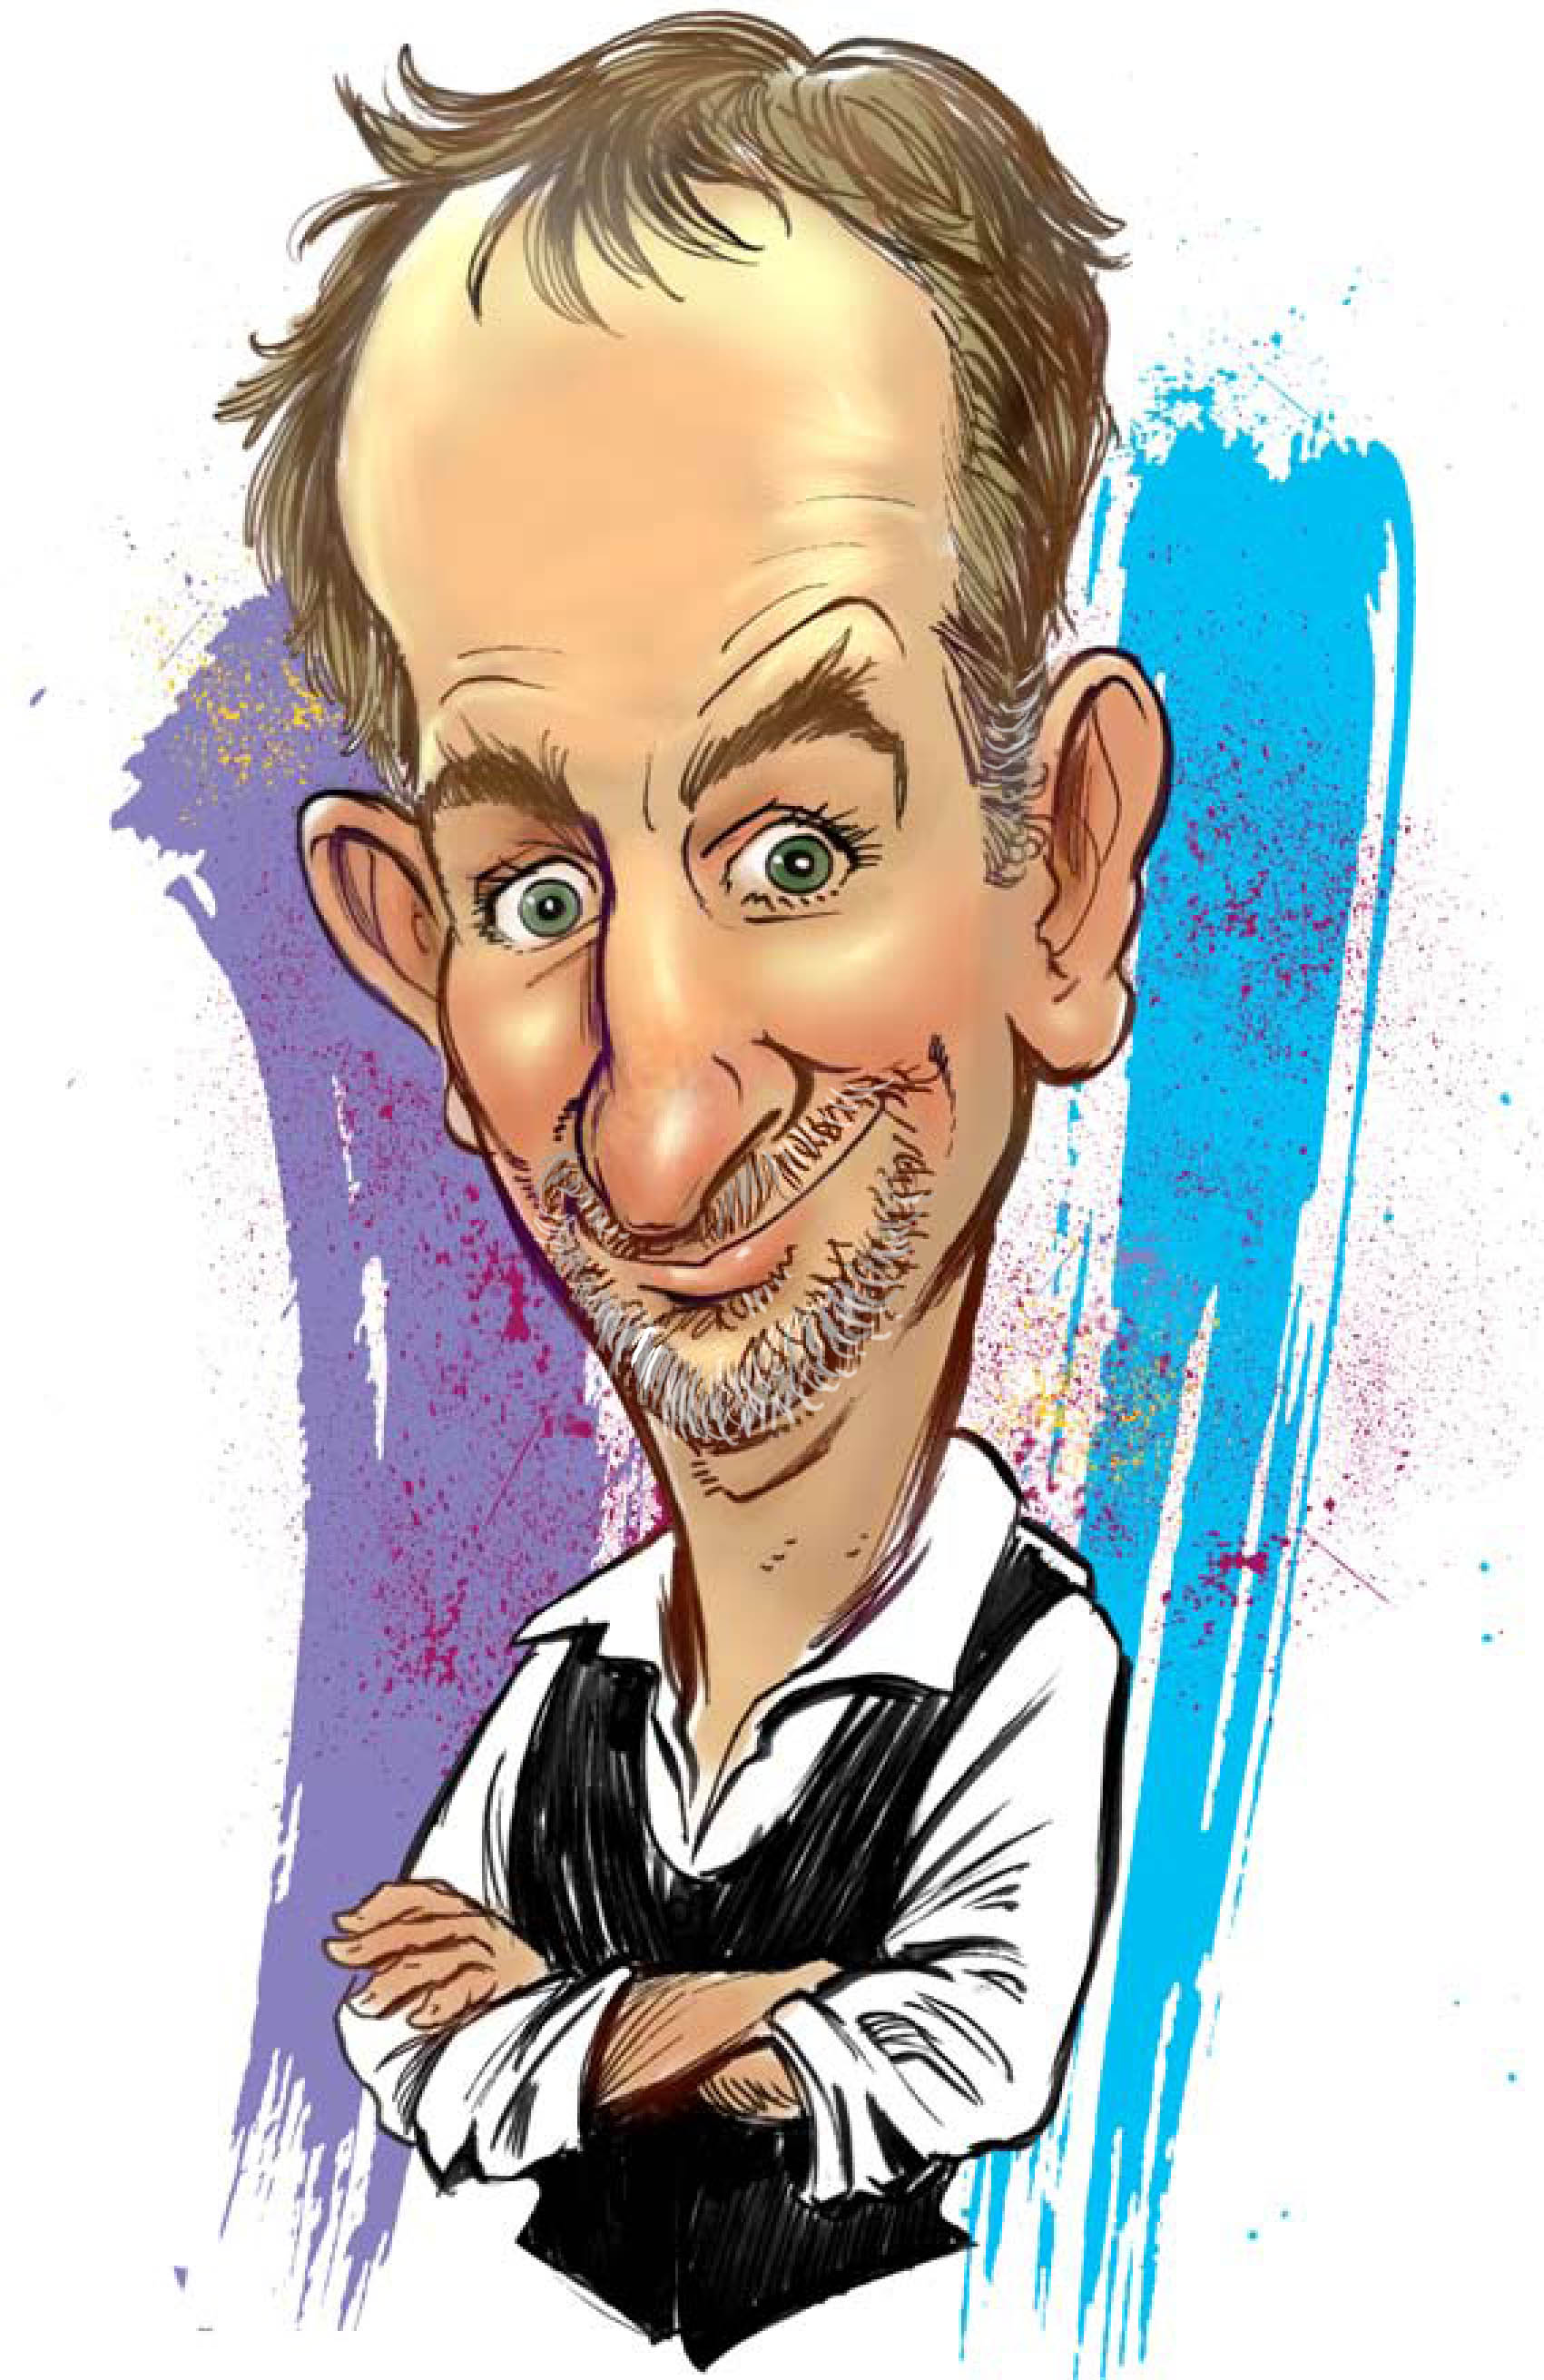 Caricature Artist Online Free My name is jerry emerson, and i have